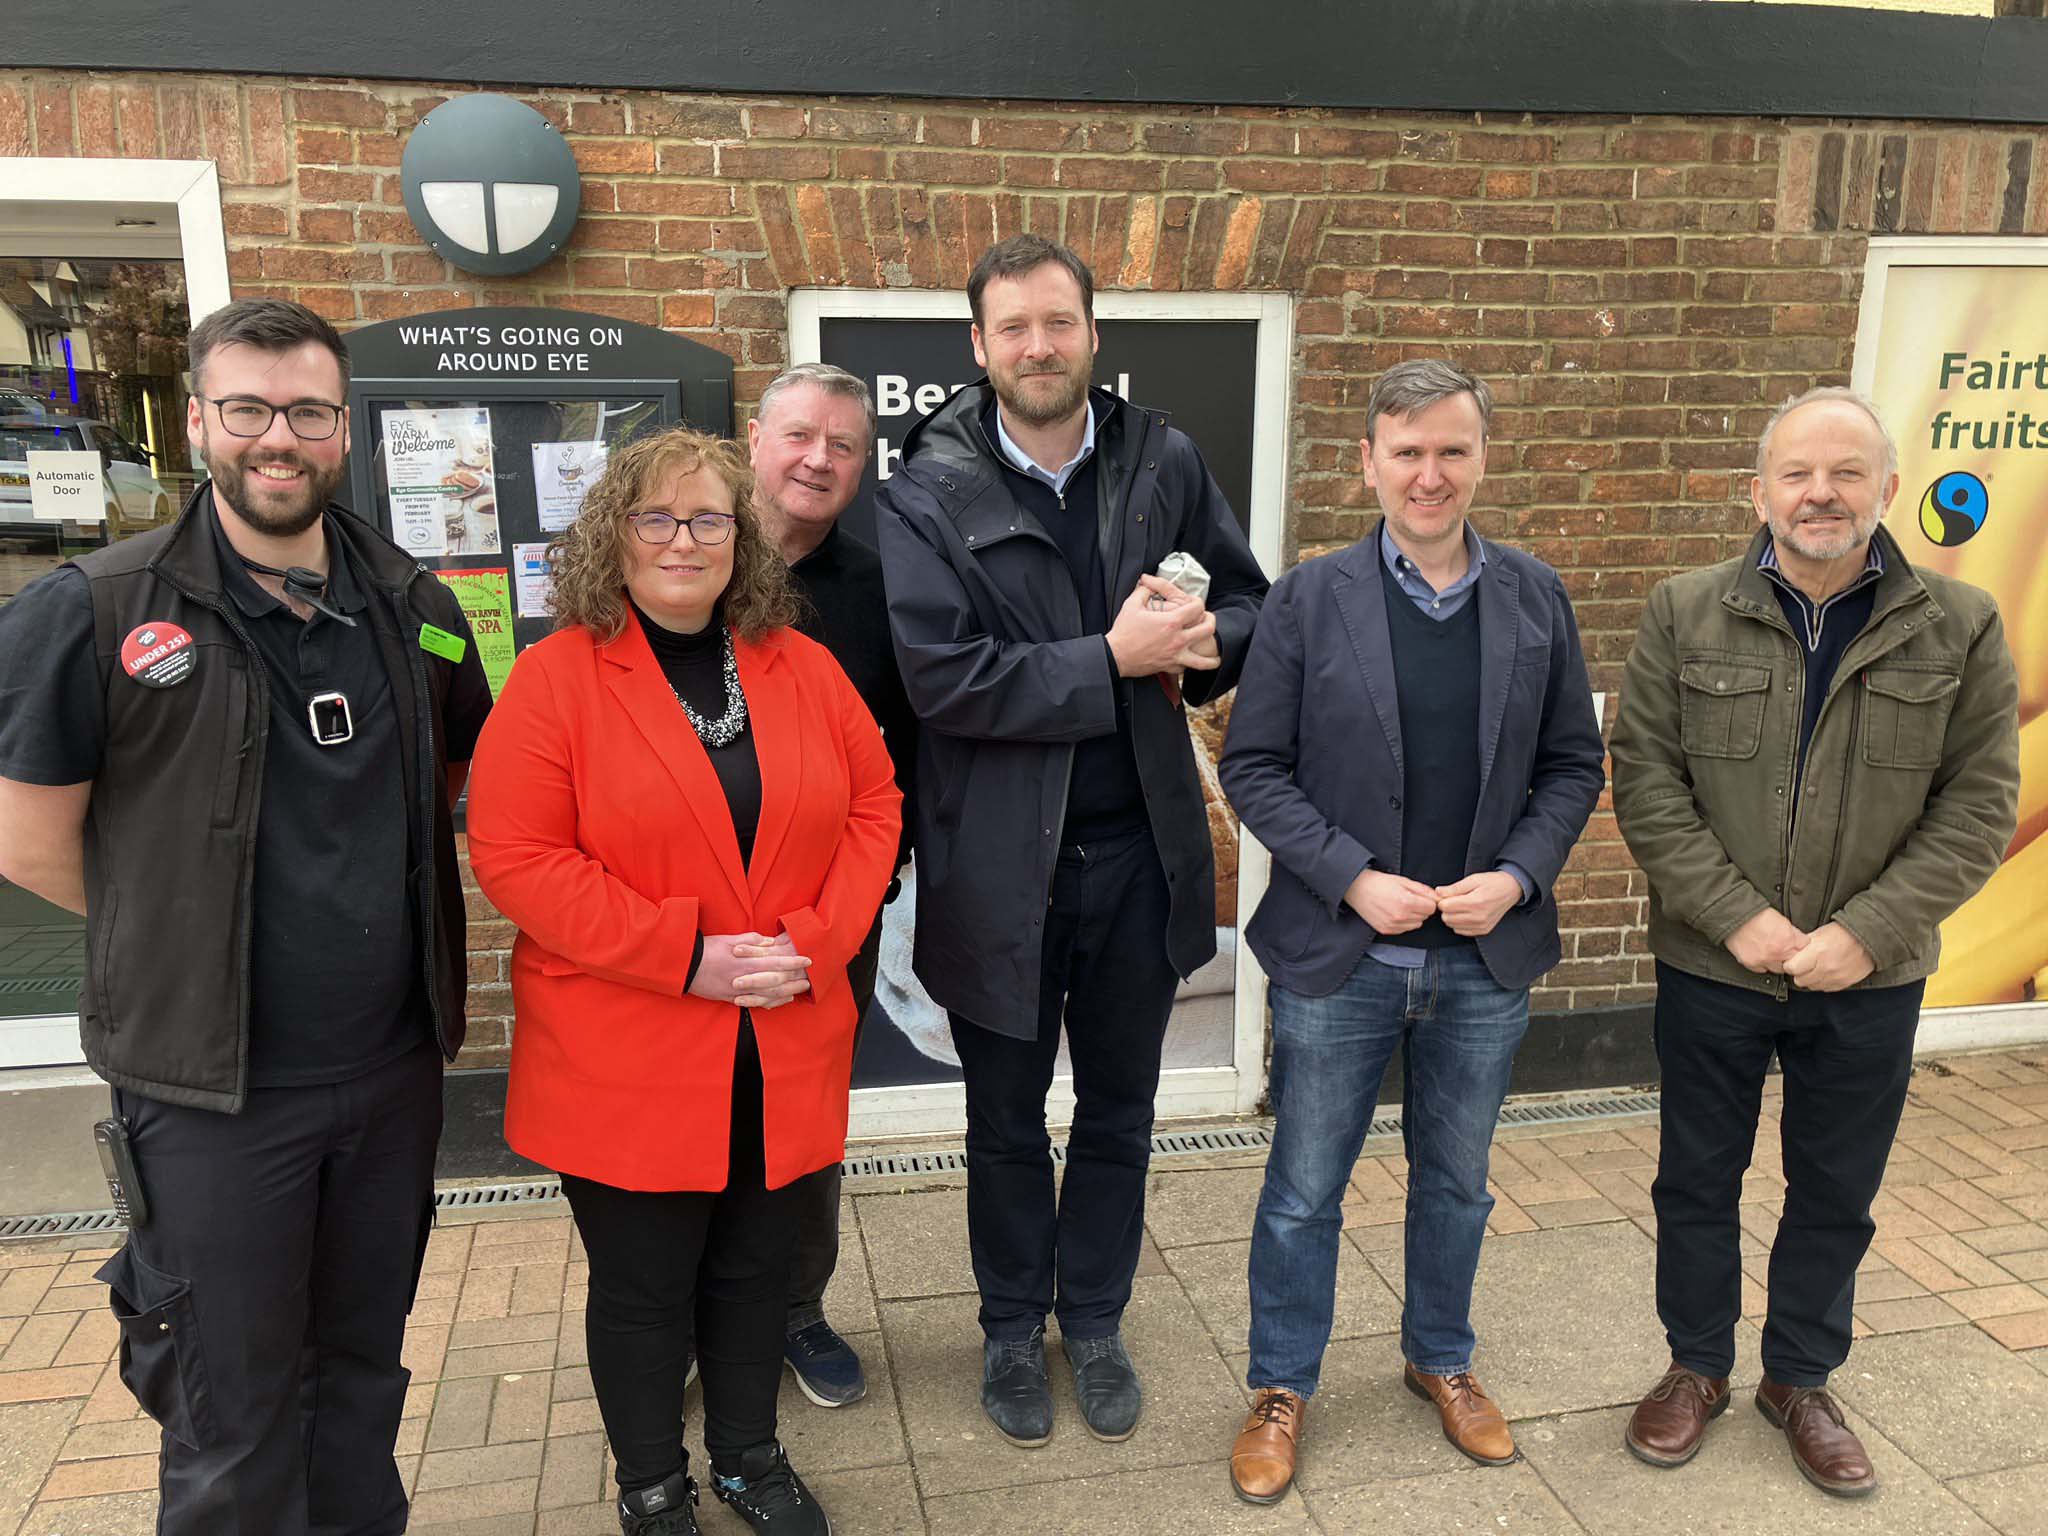 Alongside Cllr Anna Smith, Labour’s candidate to be Cambridgeshire Police and Crime Commissioner, Andrew Pakes, Labour’s Parliamentary candidate for Peterborough, has been leading a campaign for tougher enforcement action against retail crimes and greater protection for shopworkers. Here meeting shop workers in Eye.